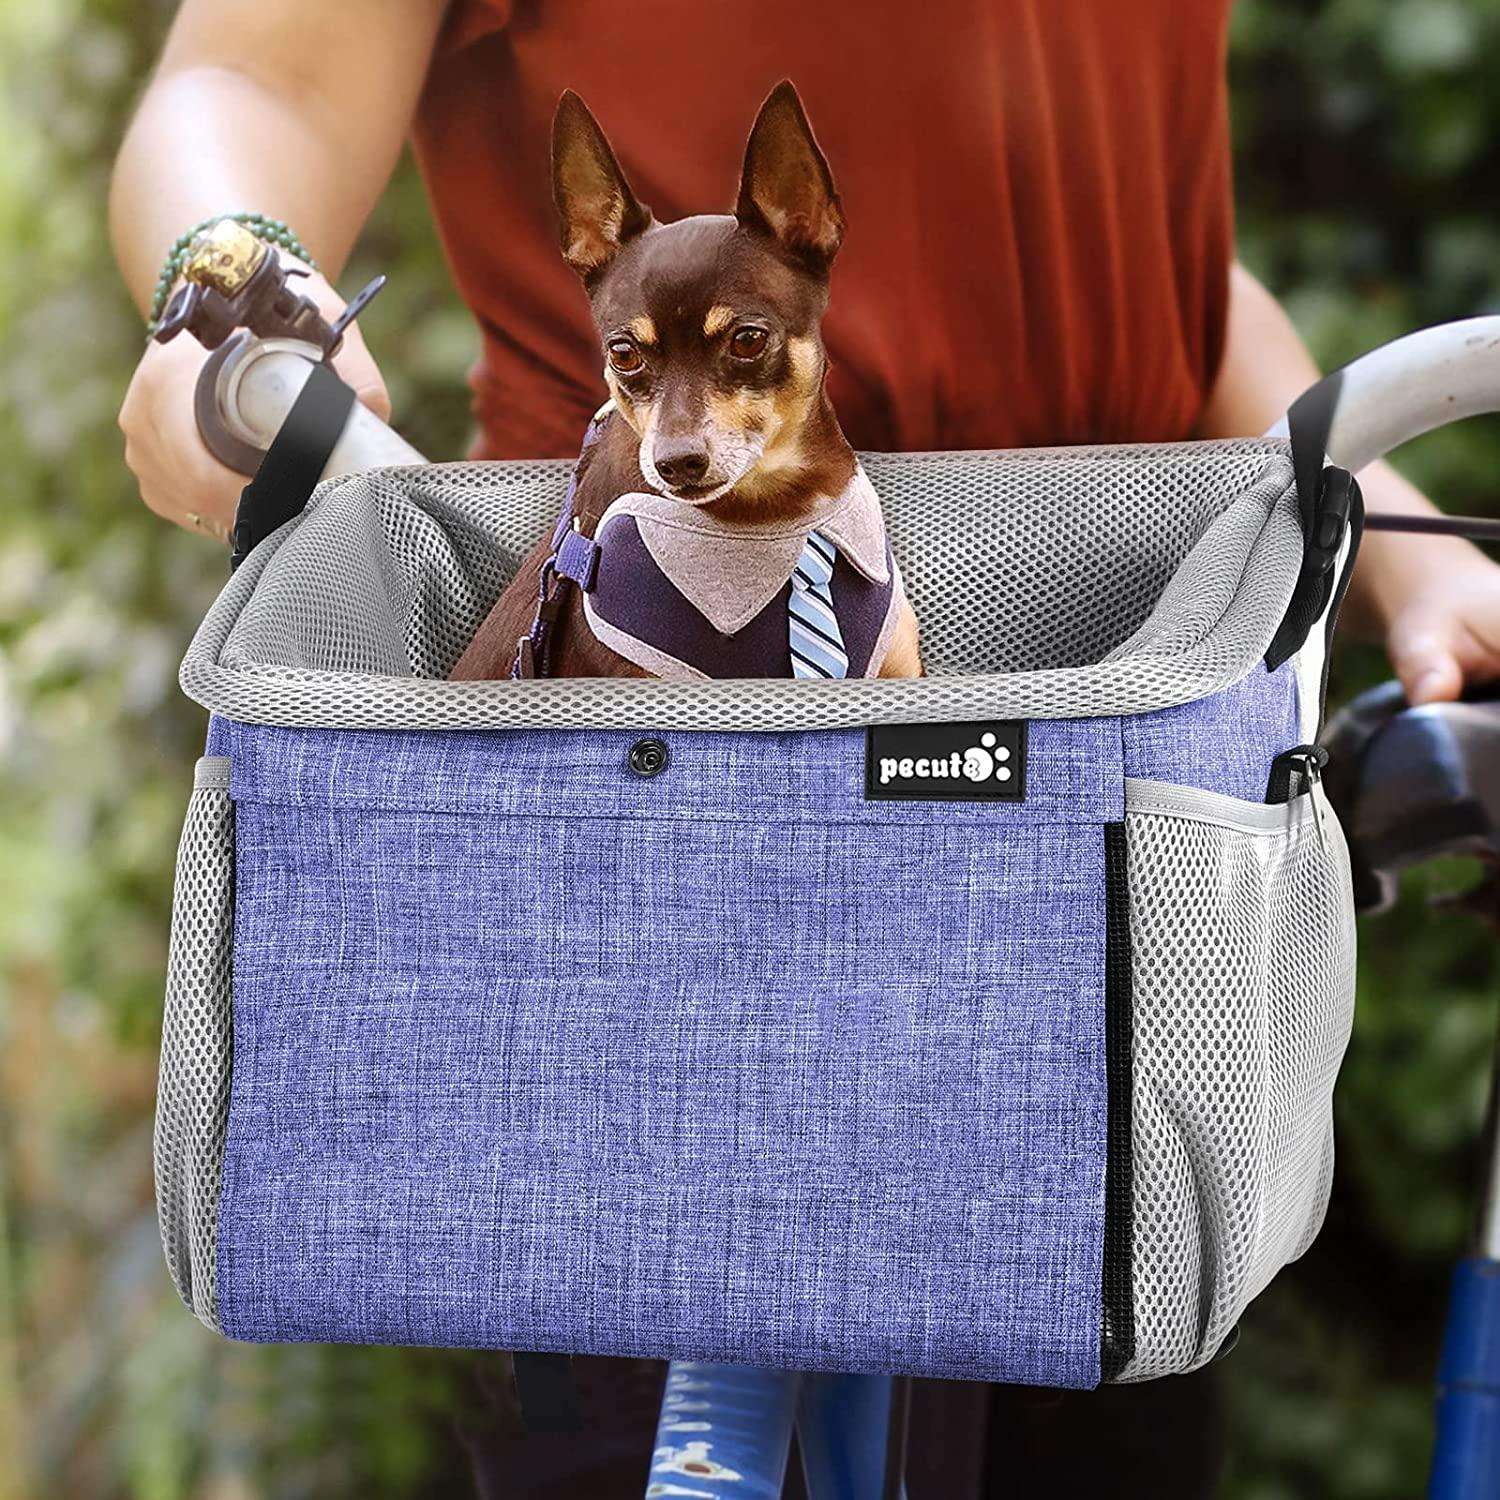 Dog Bike Basket Pet Carrier Bicycle, Car Seat Pet Booster Seat with Portable Breathable Pet Carrier Travel - Bicycle bag - 1